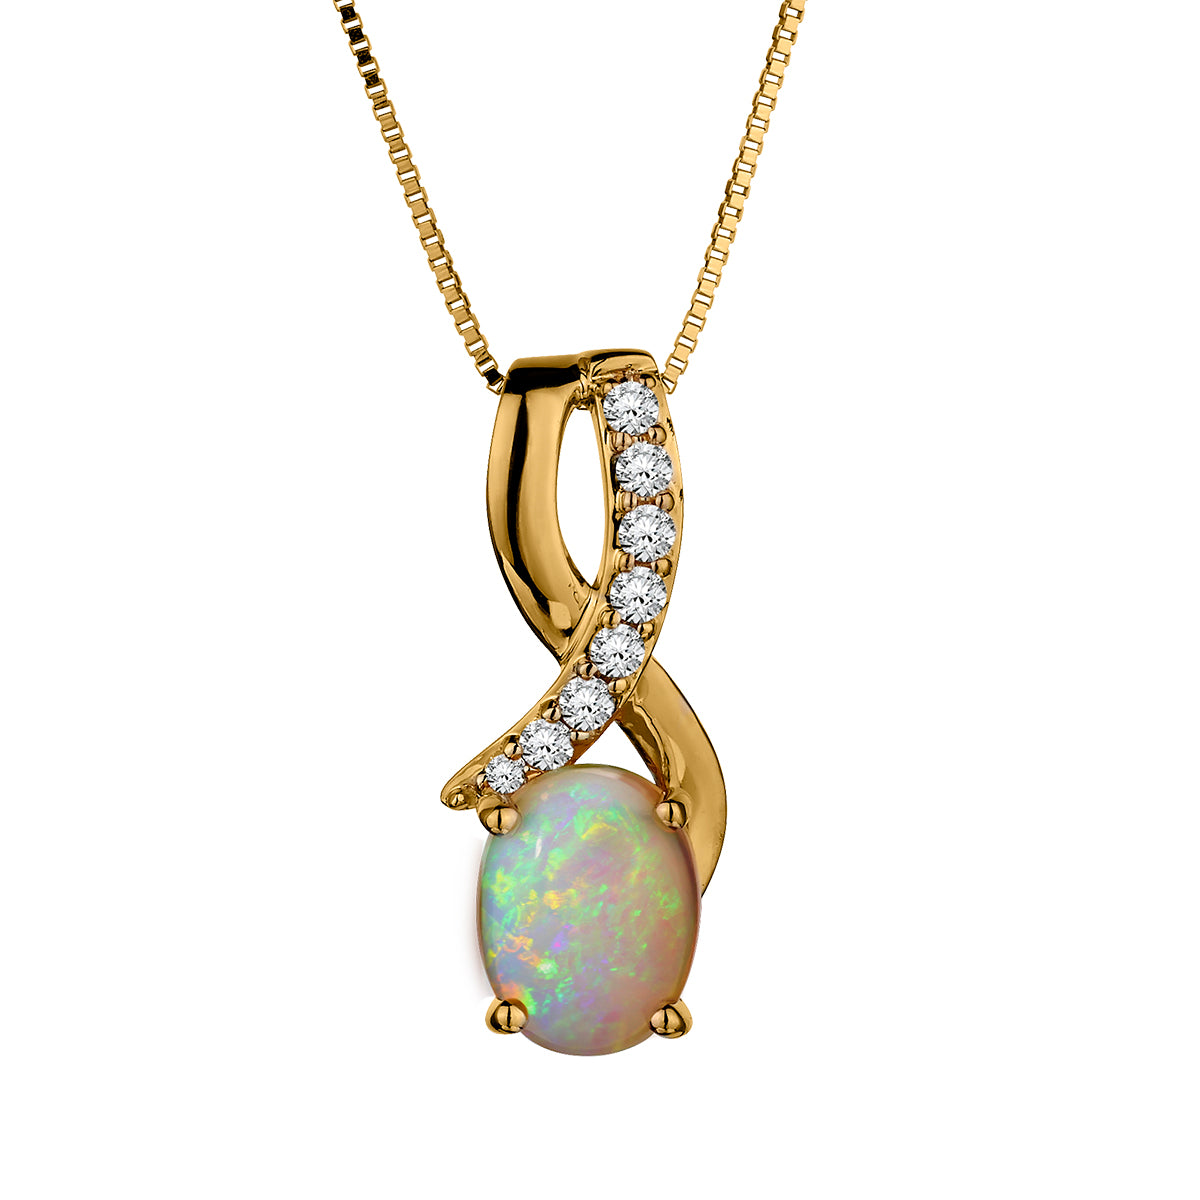 .84 Carat Ethiopian Opal and .11 Carat Diamond Pendant,  10kt Yellow Gold. Necklaces and Pendants. Griffin Jewellery Designs. 